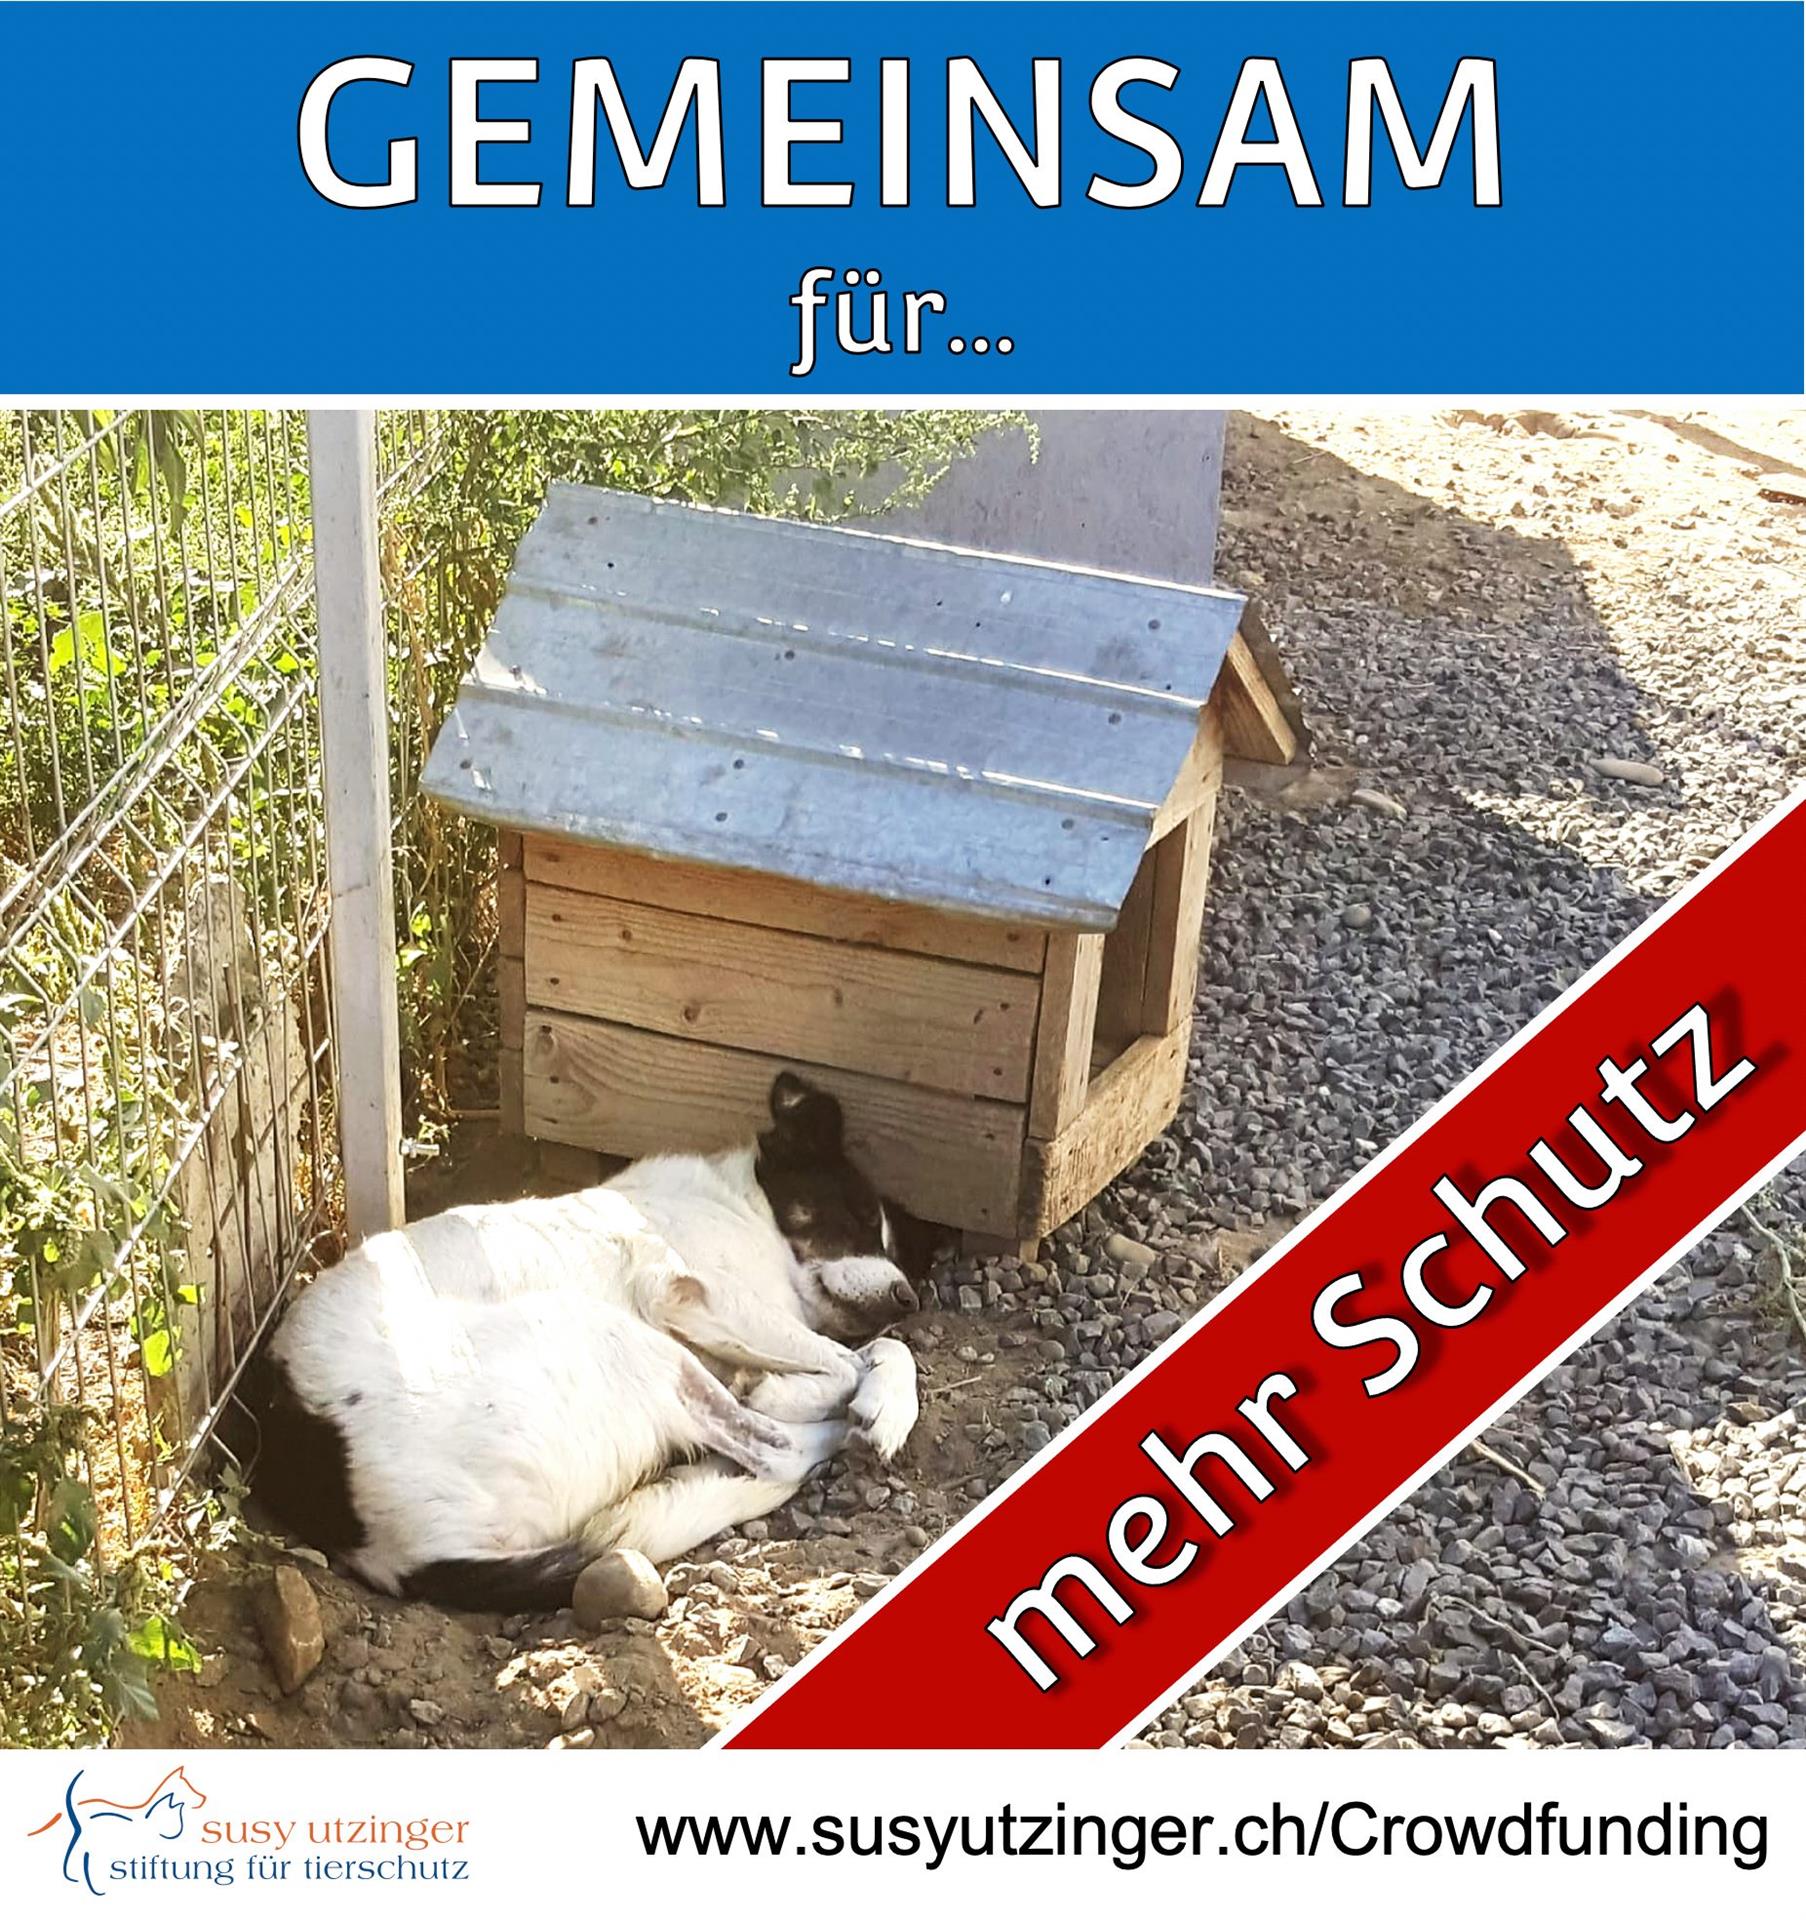 Crowdfunding for the SUST Shelter in Galati, Romania